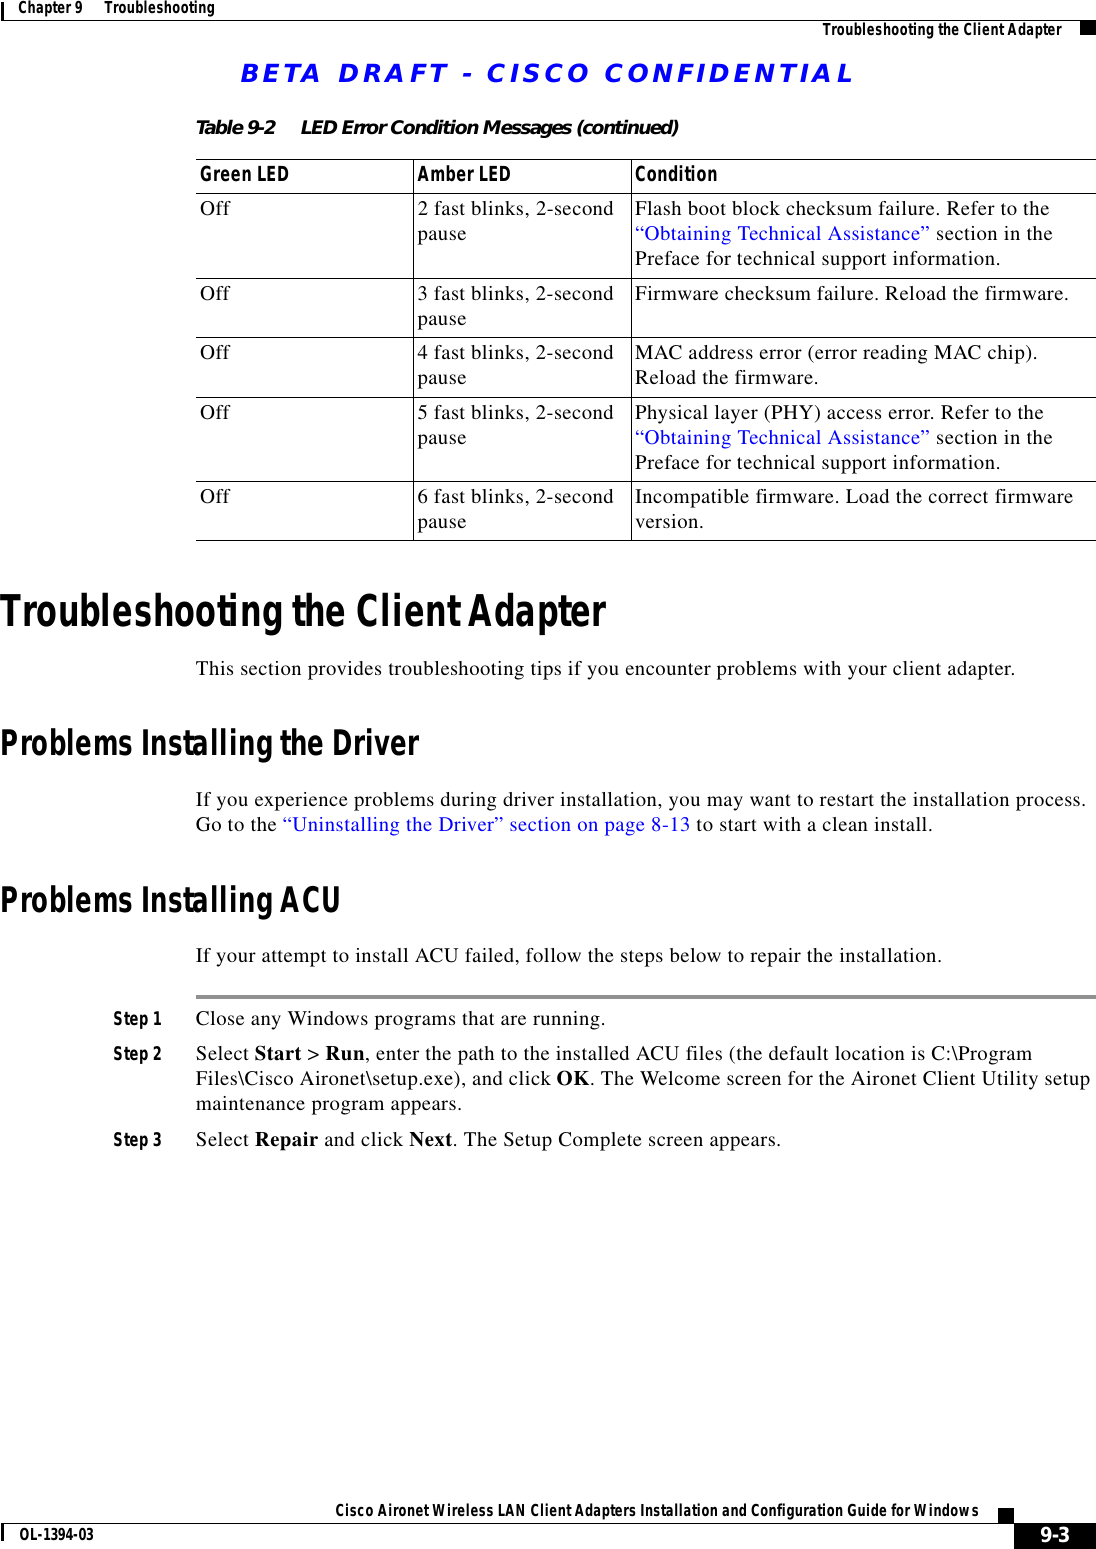 BETA DRAFT - CISCO CONFIDENTIAL9-3Cisco Aironet Wireless LAN Client Adapters Installation and Configuration Guide for WindowsOL-1394-03Chapter 9      Troubleshooting Troubleshooting the Client AdapterTroubleshooting the Client AdapterThis section provides troubleshooting tips if you encounter problems with your client adapter.Problems Installing the DriverIf you experience problems during driver installation, you may want to restart the installation process. Go to the “Uninstalling the Driver” section on page 8-13 to start with a clean install.Problems Installing ACUIf your attempt to install ACU failed, follow the steps below to repair the installation.Step 1 Close any Windows programs that are running.Step 2 Select Start &gt; Run, enter the path to the installed ACU files (the default location is C:\Program Files\Cisco Aironet\setup.exe), and click OK. The Welcome screen for the Aironet Client Utility setup maintenance program appears.Step 3 Select Repair and click Next. The Setup Complete screen appears.Off 2 fast blinks, 2-second pause Flash boot block checksum failure. Refer to the “Obtaining Technical Assistance” section in the Preface for technical support information.Off 3 fast blinks, 2-second pause Firmware checksum failure. Reload the firmware.Off 4 fast blinks, 2-second pause MAC address error (error reading MAC chip). Reload the firmware.Off 5 fast blinks, 2-second pause Physical layer (PHY) access error. Refer to the “Obtaining Technical Assistance” section in the Preface for technical support information.Off 6 fast blinks, 2-second pause Incompatible firmware. Load the correct firmware version.Table 9-2 LED Error Condition Messages (continued)Green LED Amber LED Condition